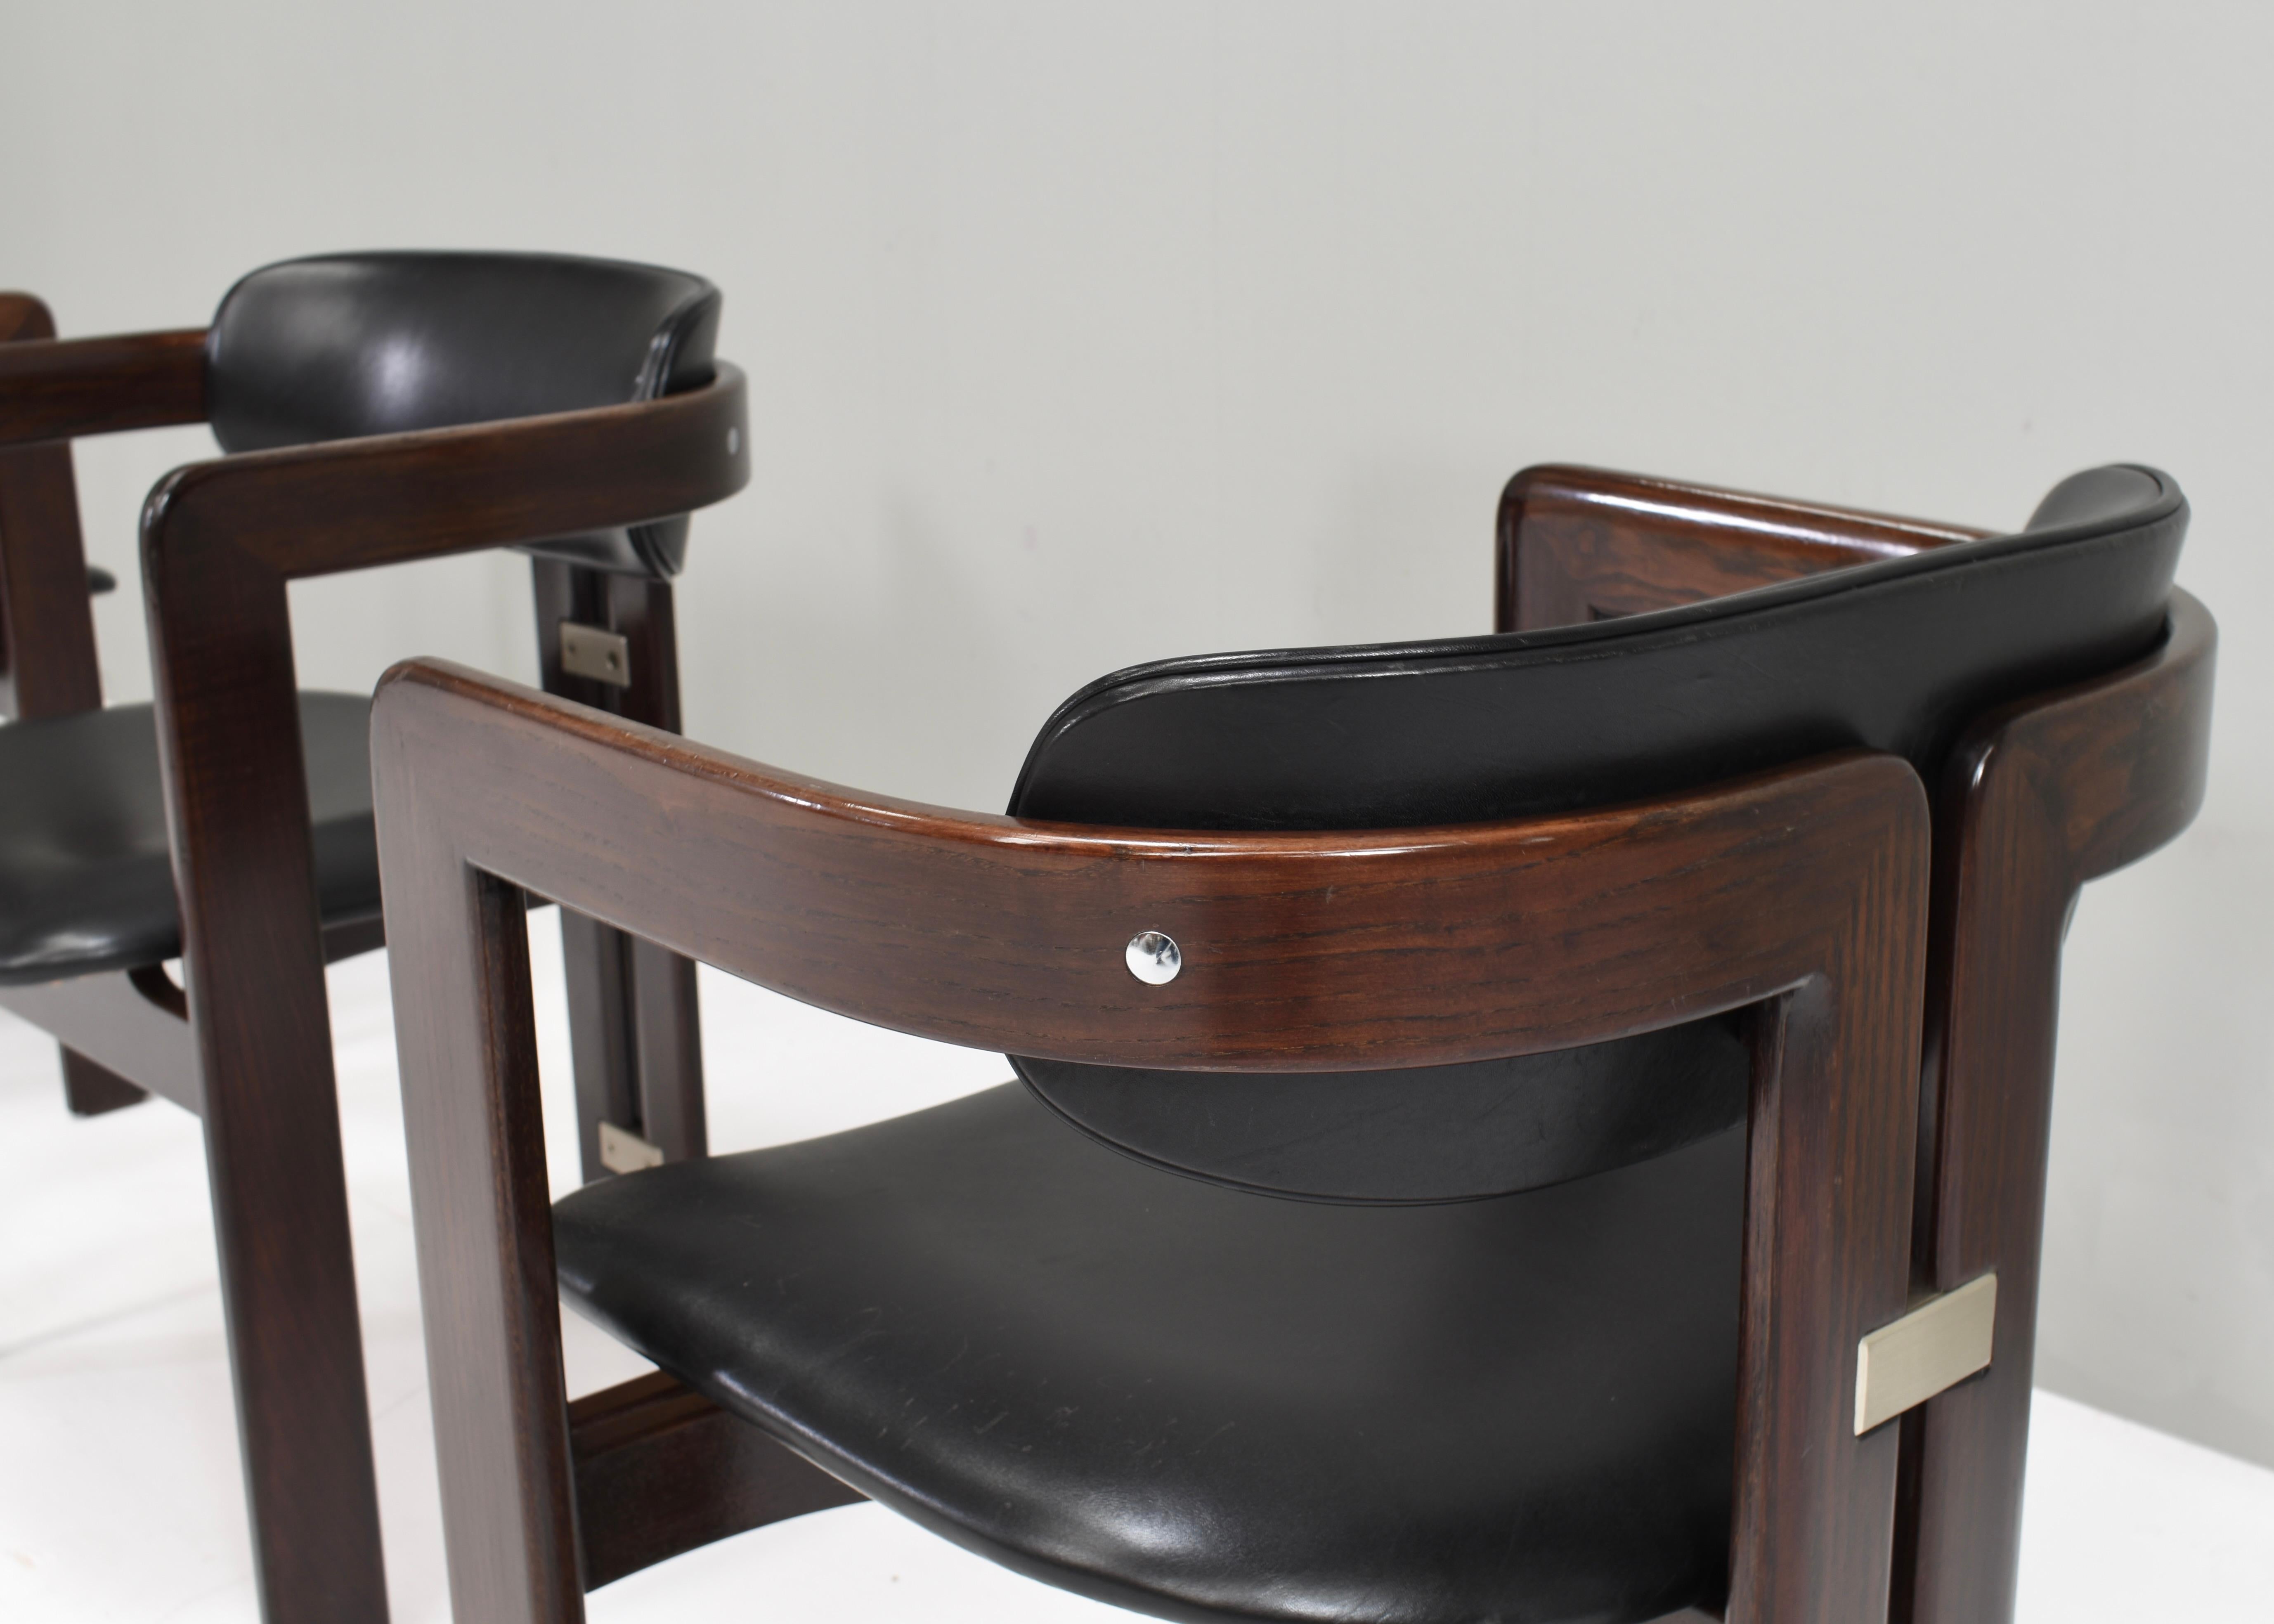 Pamplona Chairs by Augusti Savini in Black Leather - Italy, 1965, Set of 3  For Sale 3